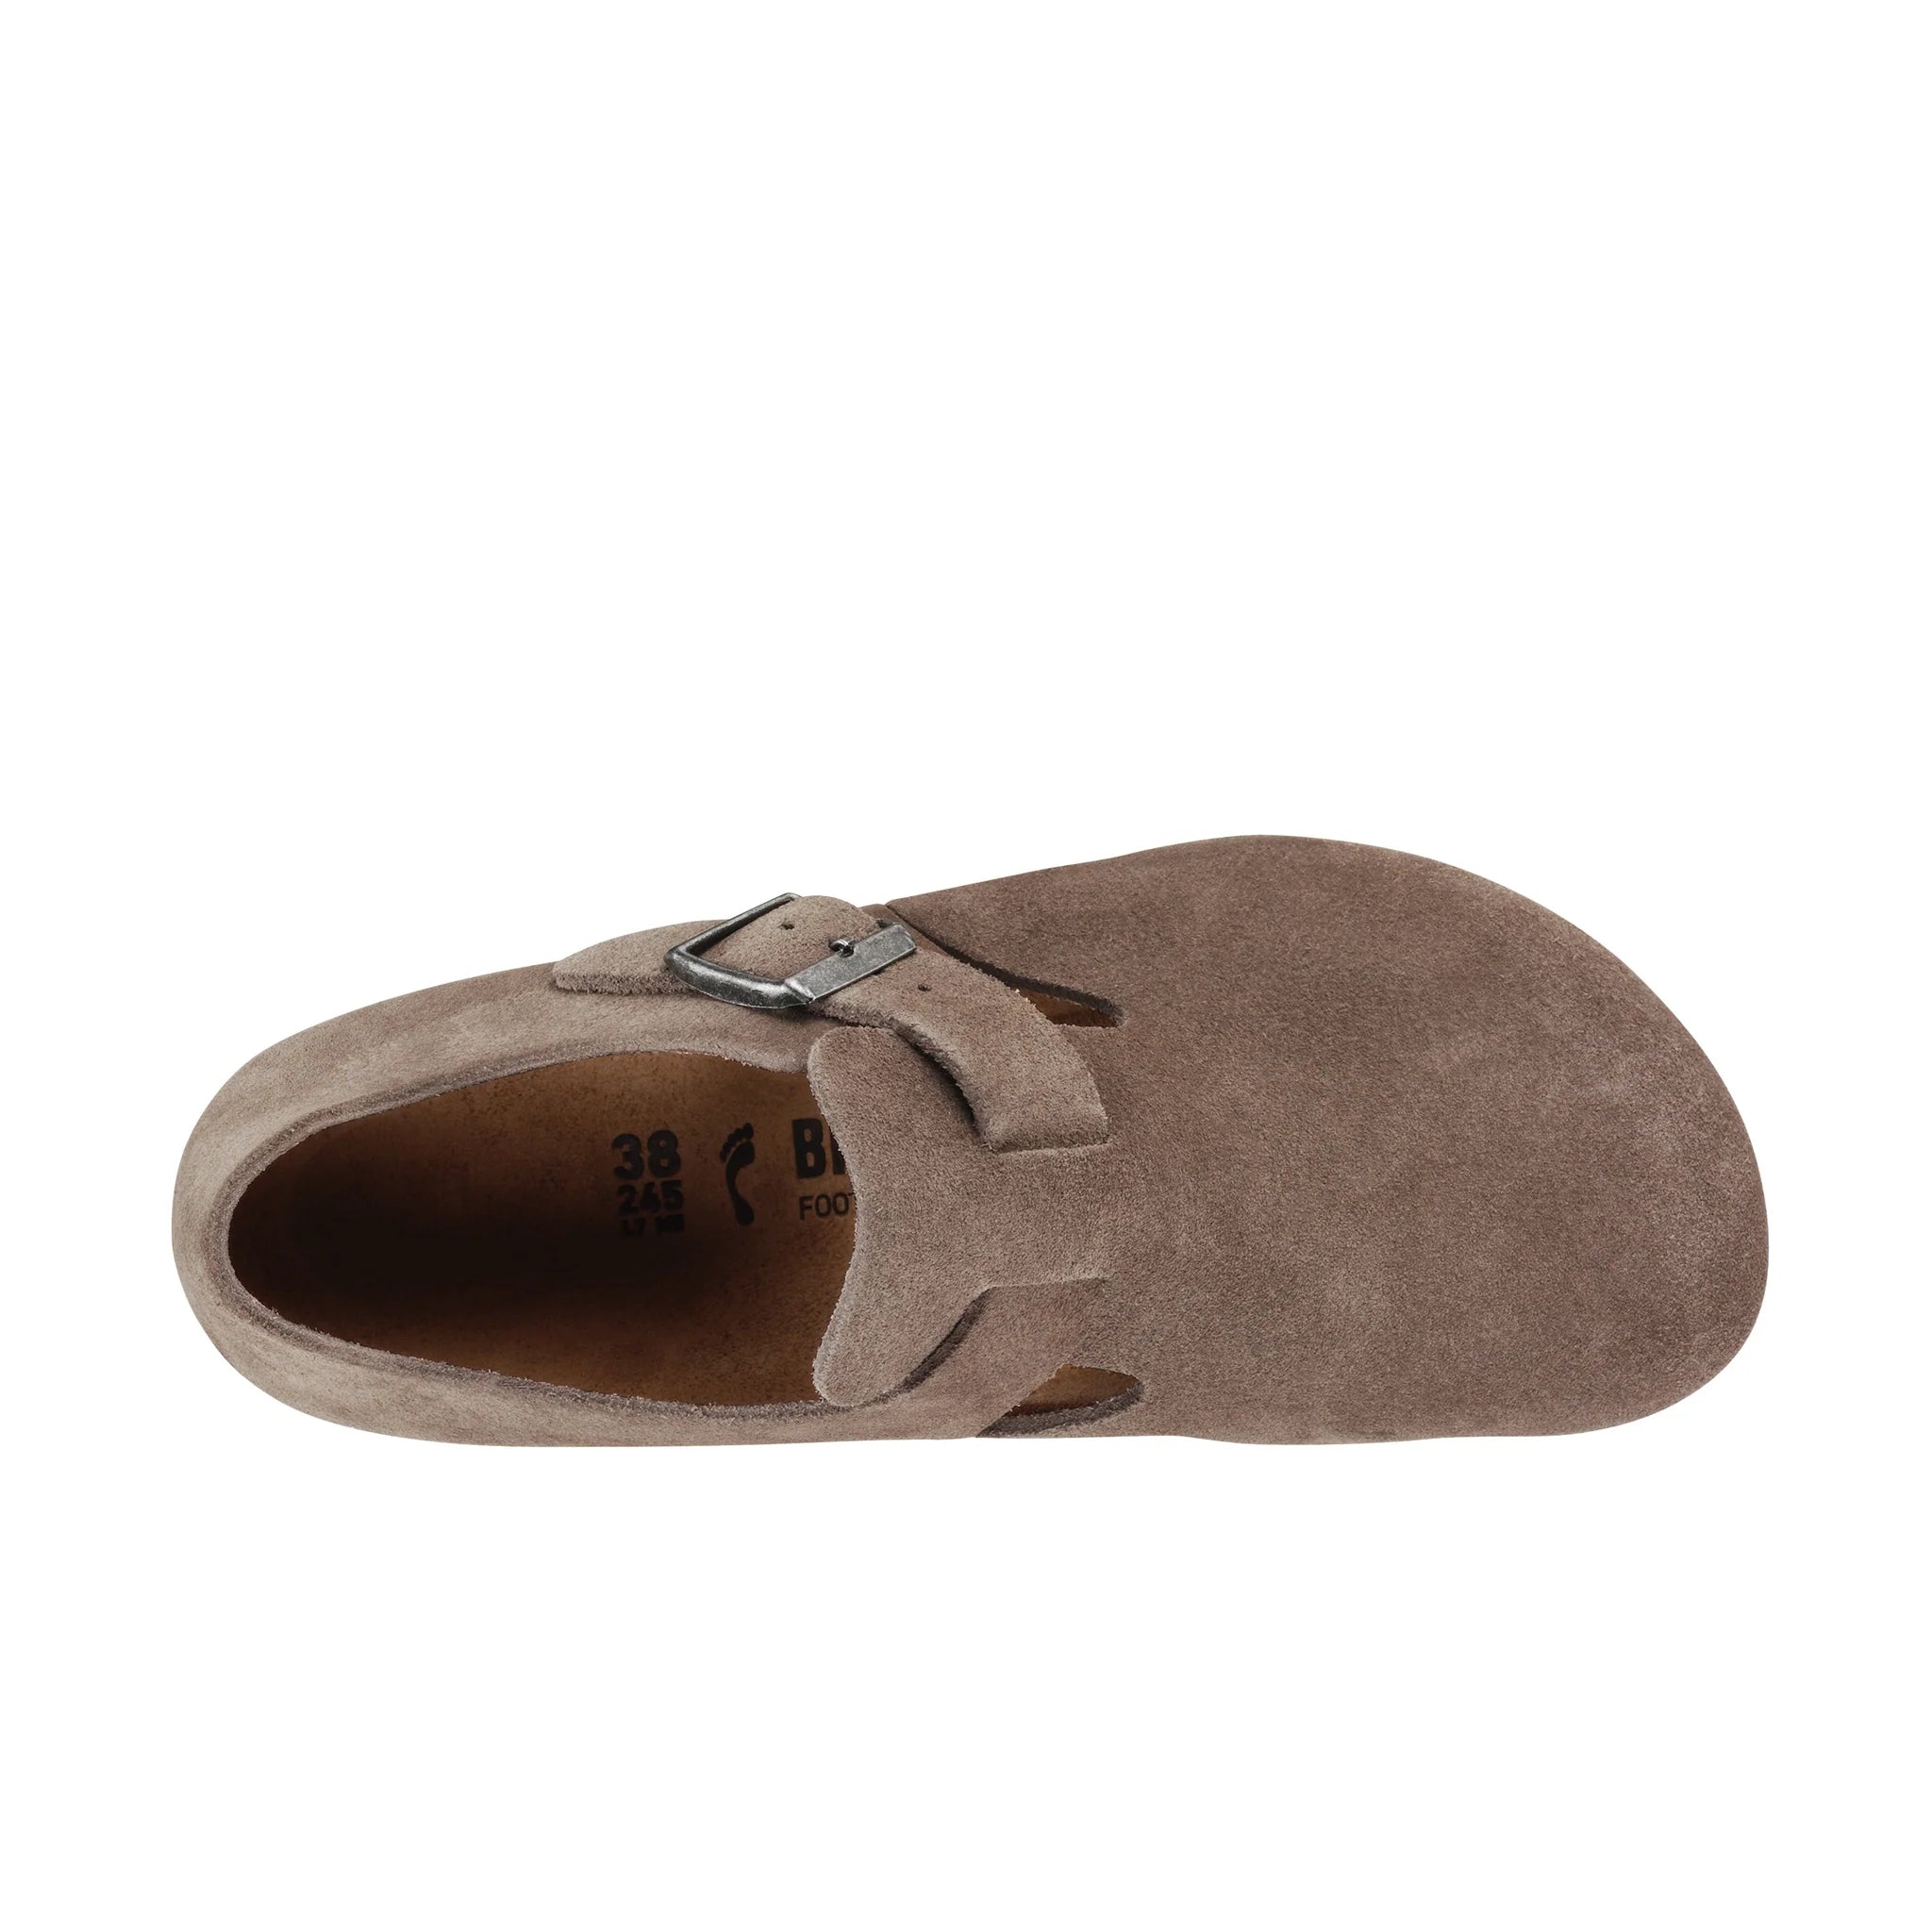 London Taupe Suede Leather Regular